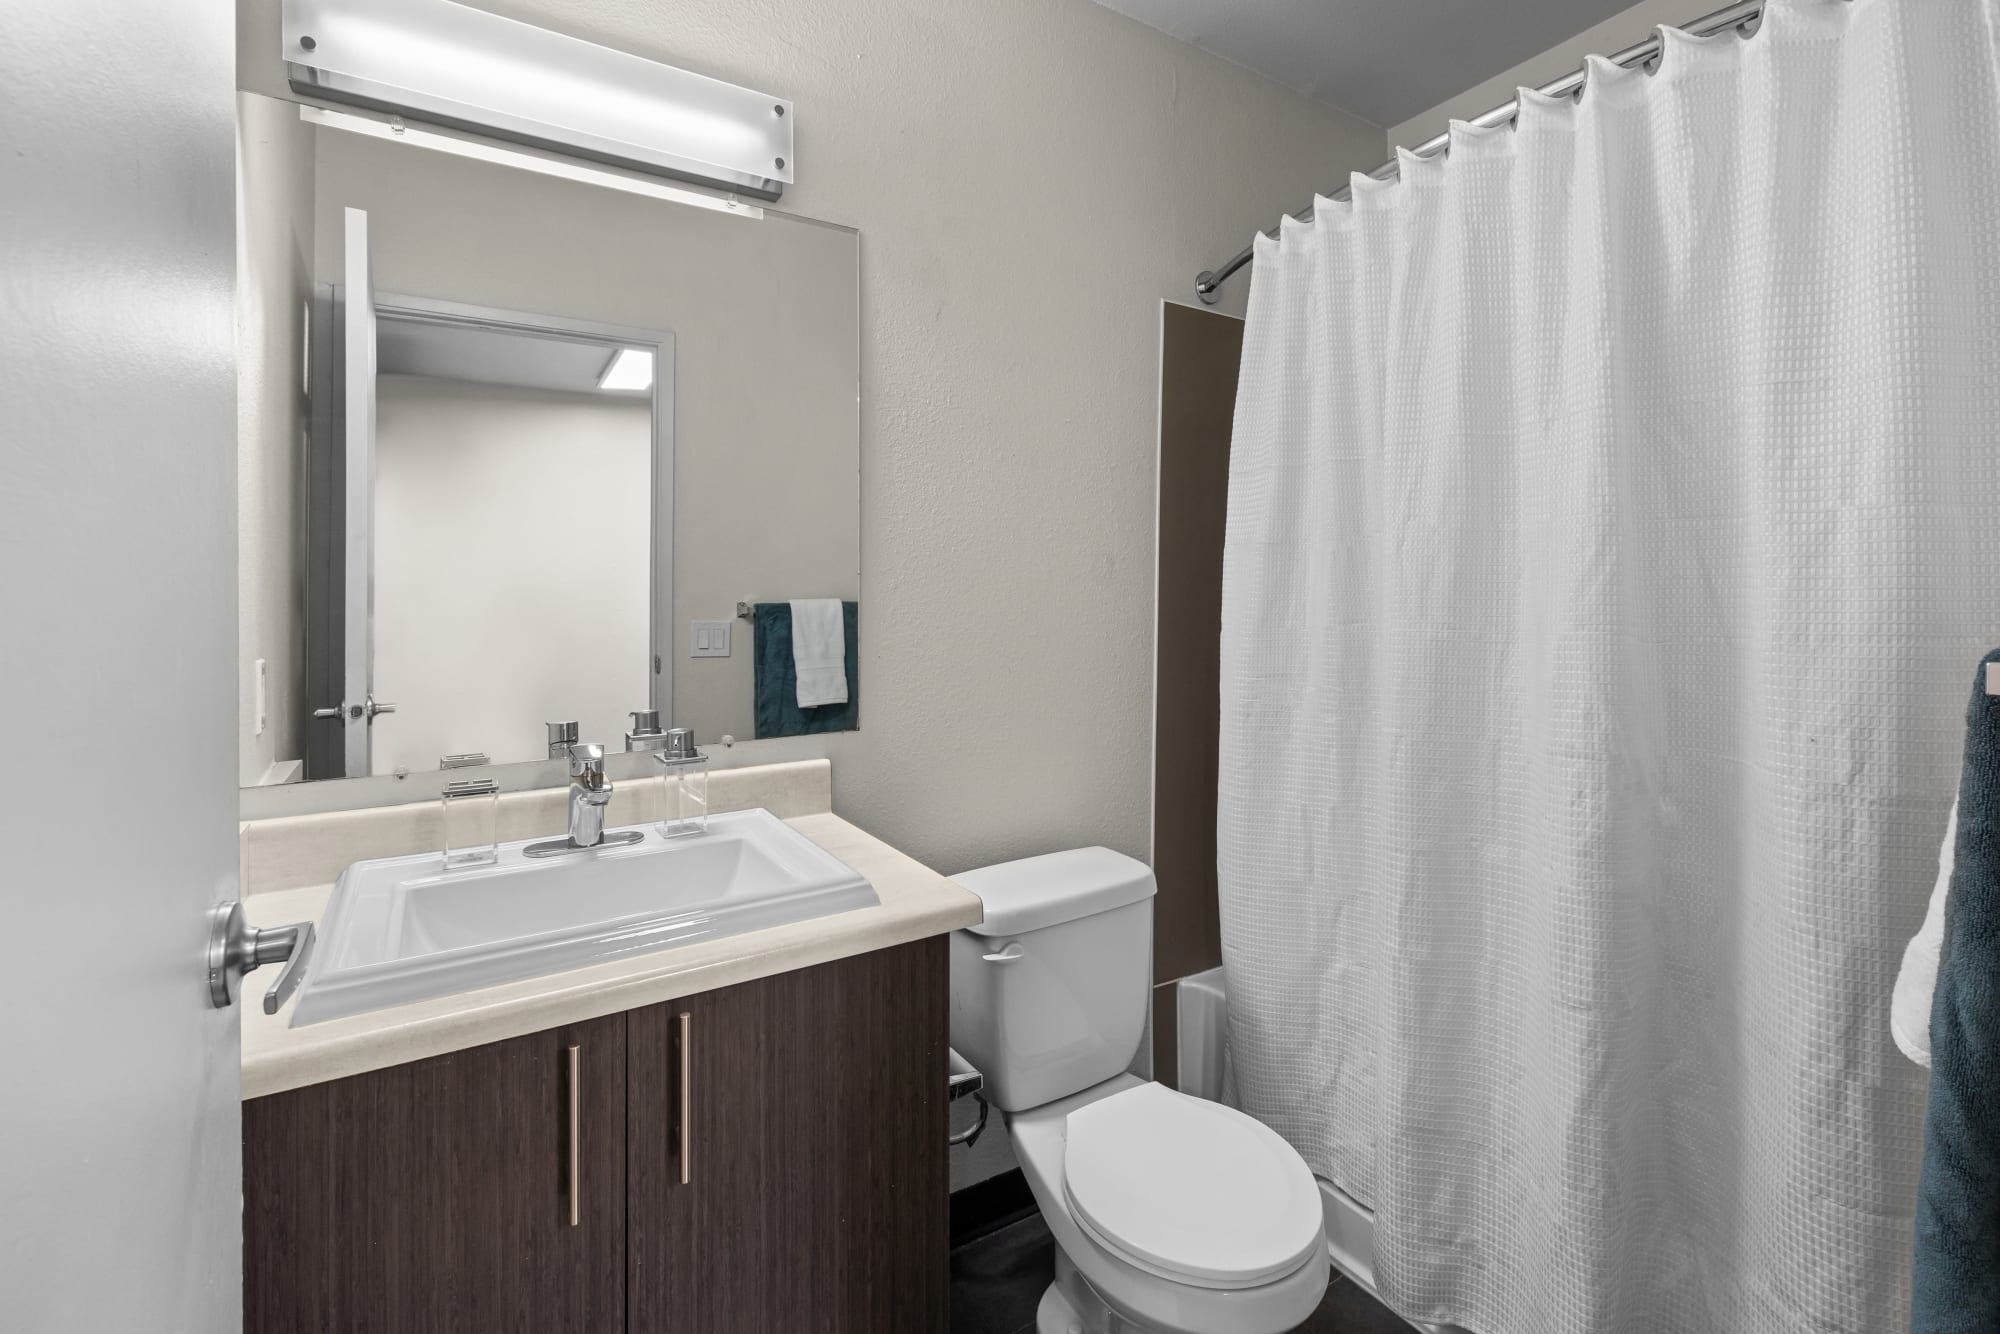 Bathroom with a tub at Karbon Apartments in Newcastle, Washington